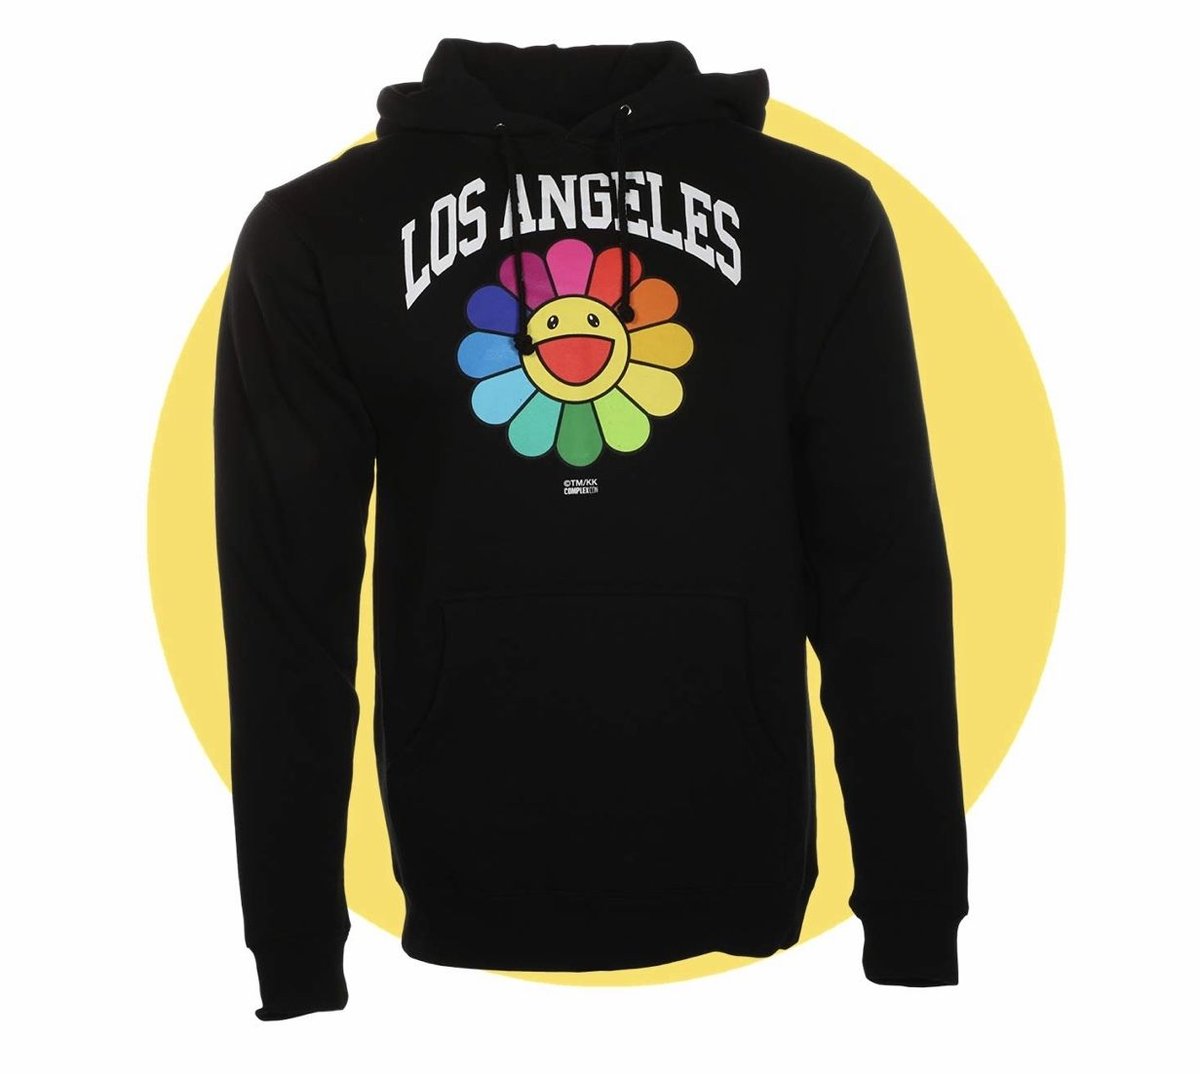 ComplexCon CHICAGO FLOWER Youth Hoodie L